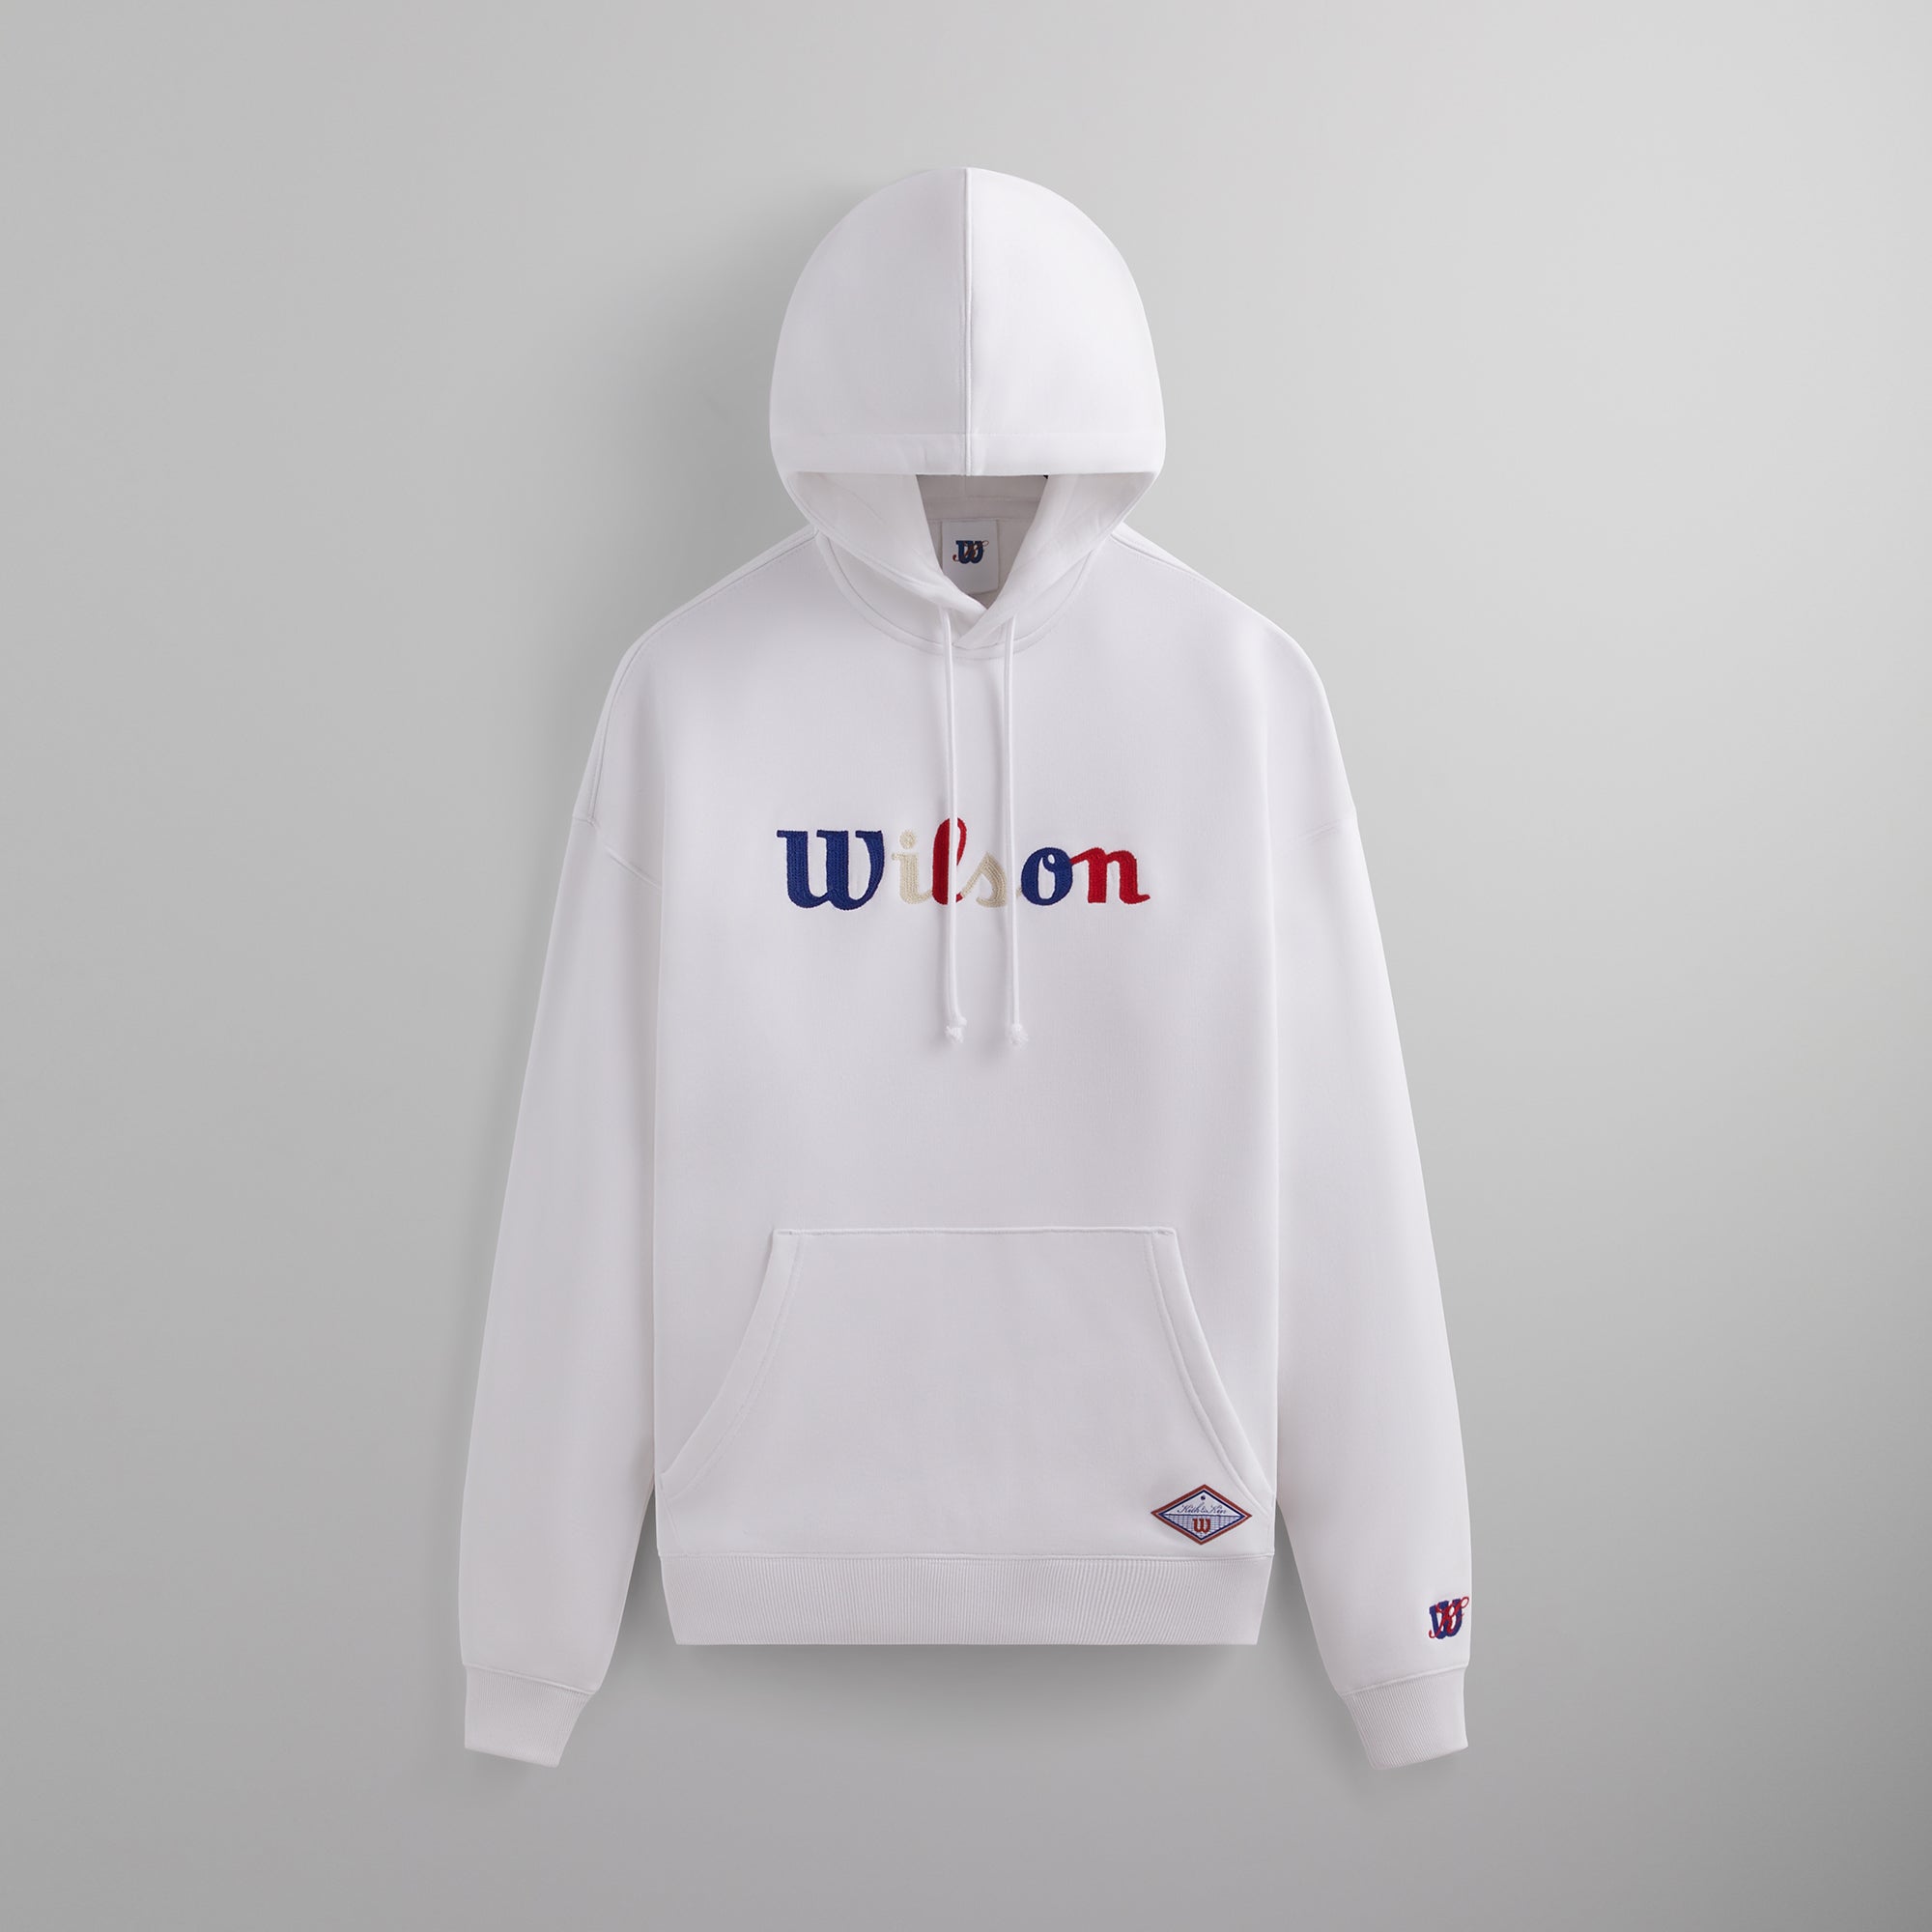 Kith for Wilson Kith and Kin Hoodie - White 